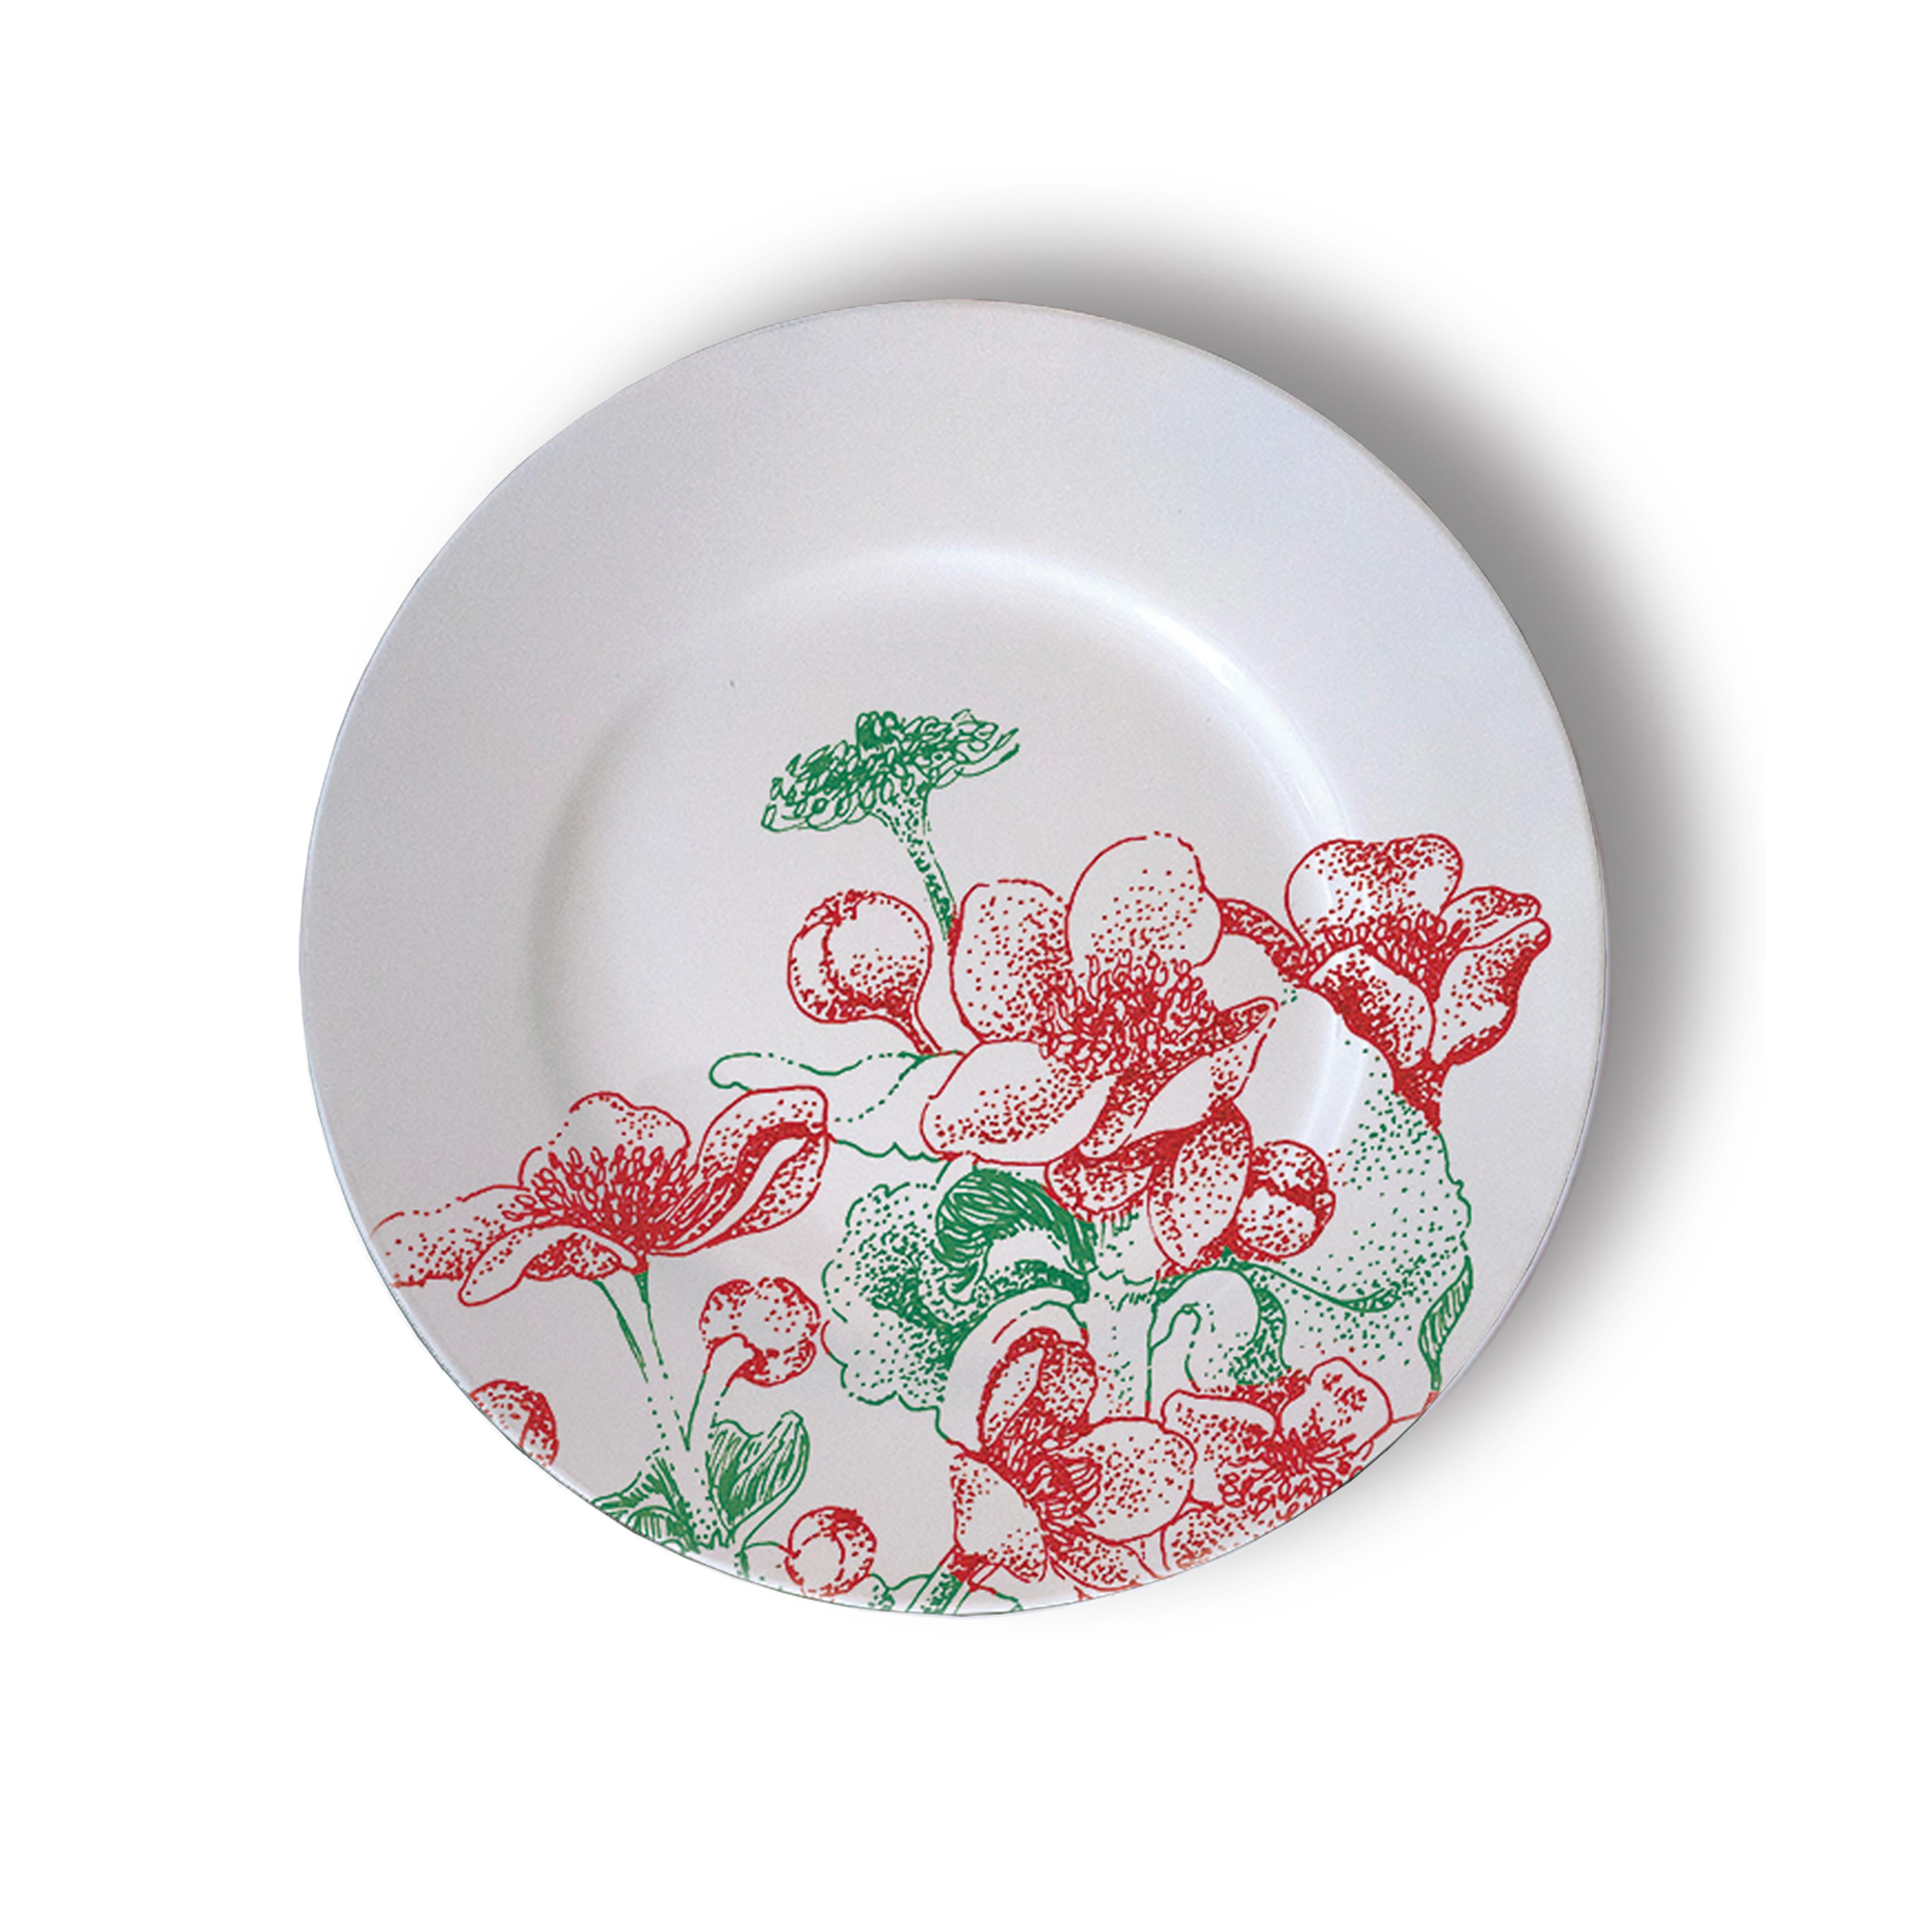 Mix & Match, Six Contemporary Porcelain Bread Plates with Multicolored Flowers For Sale 2